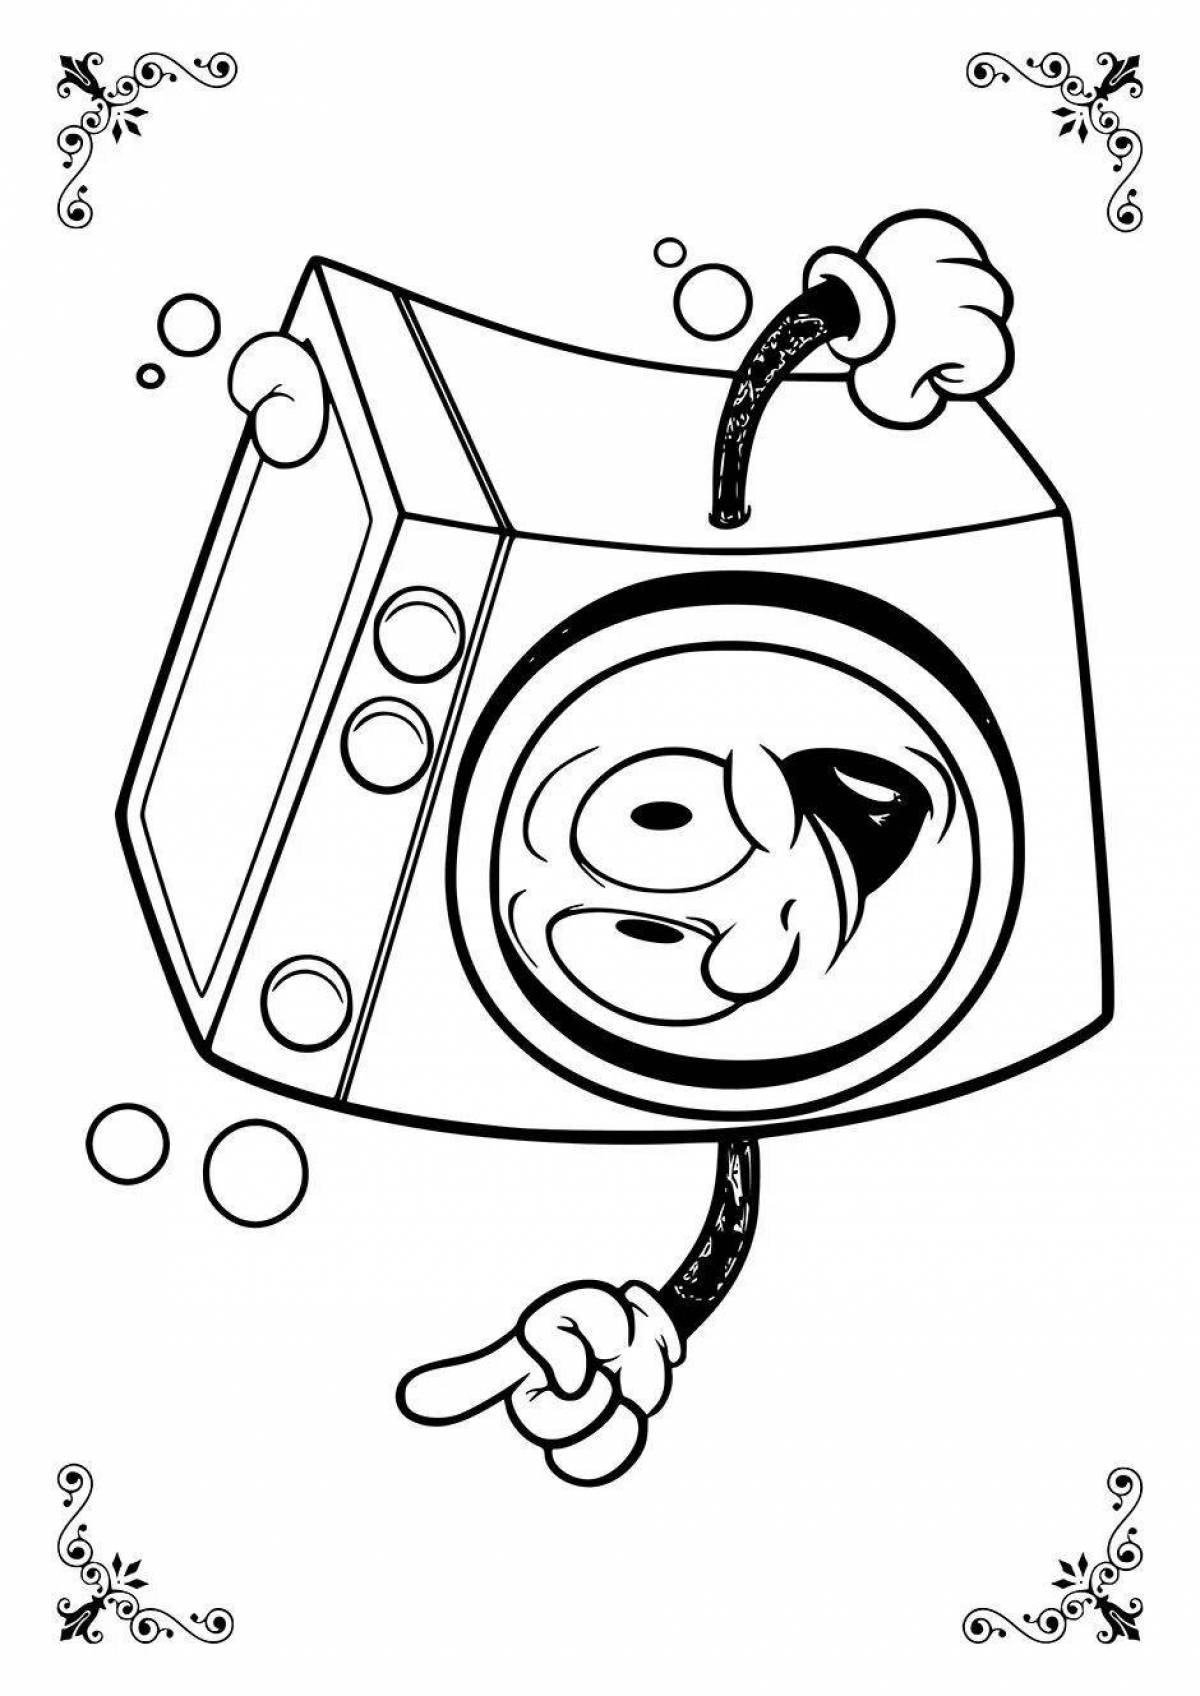 Playful washing machine coloring page for kids